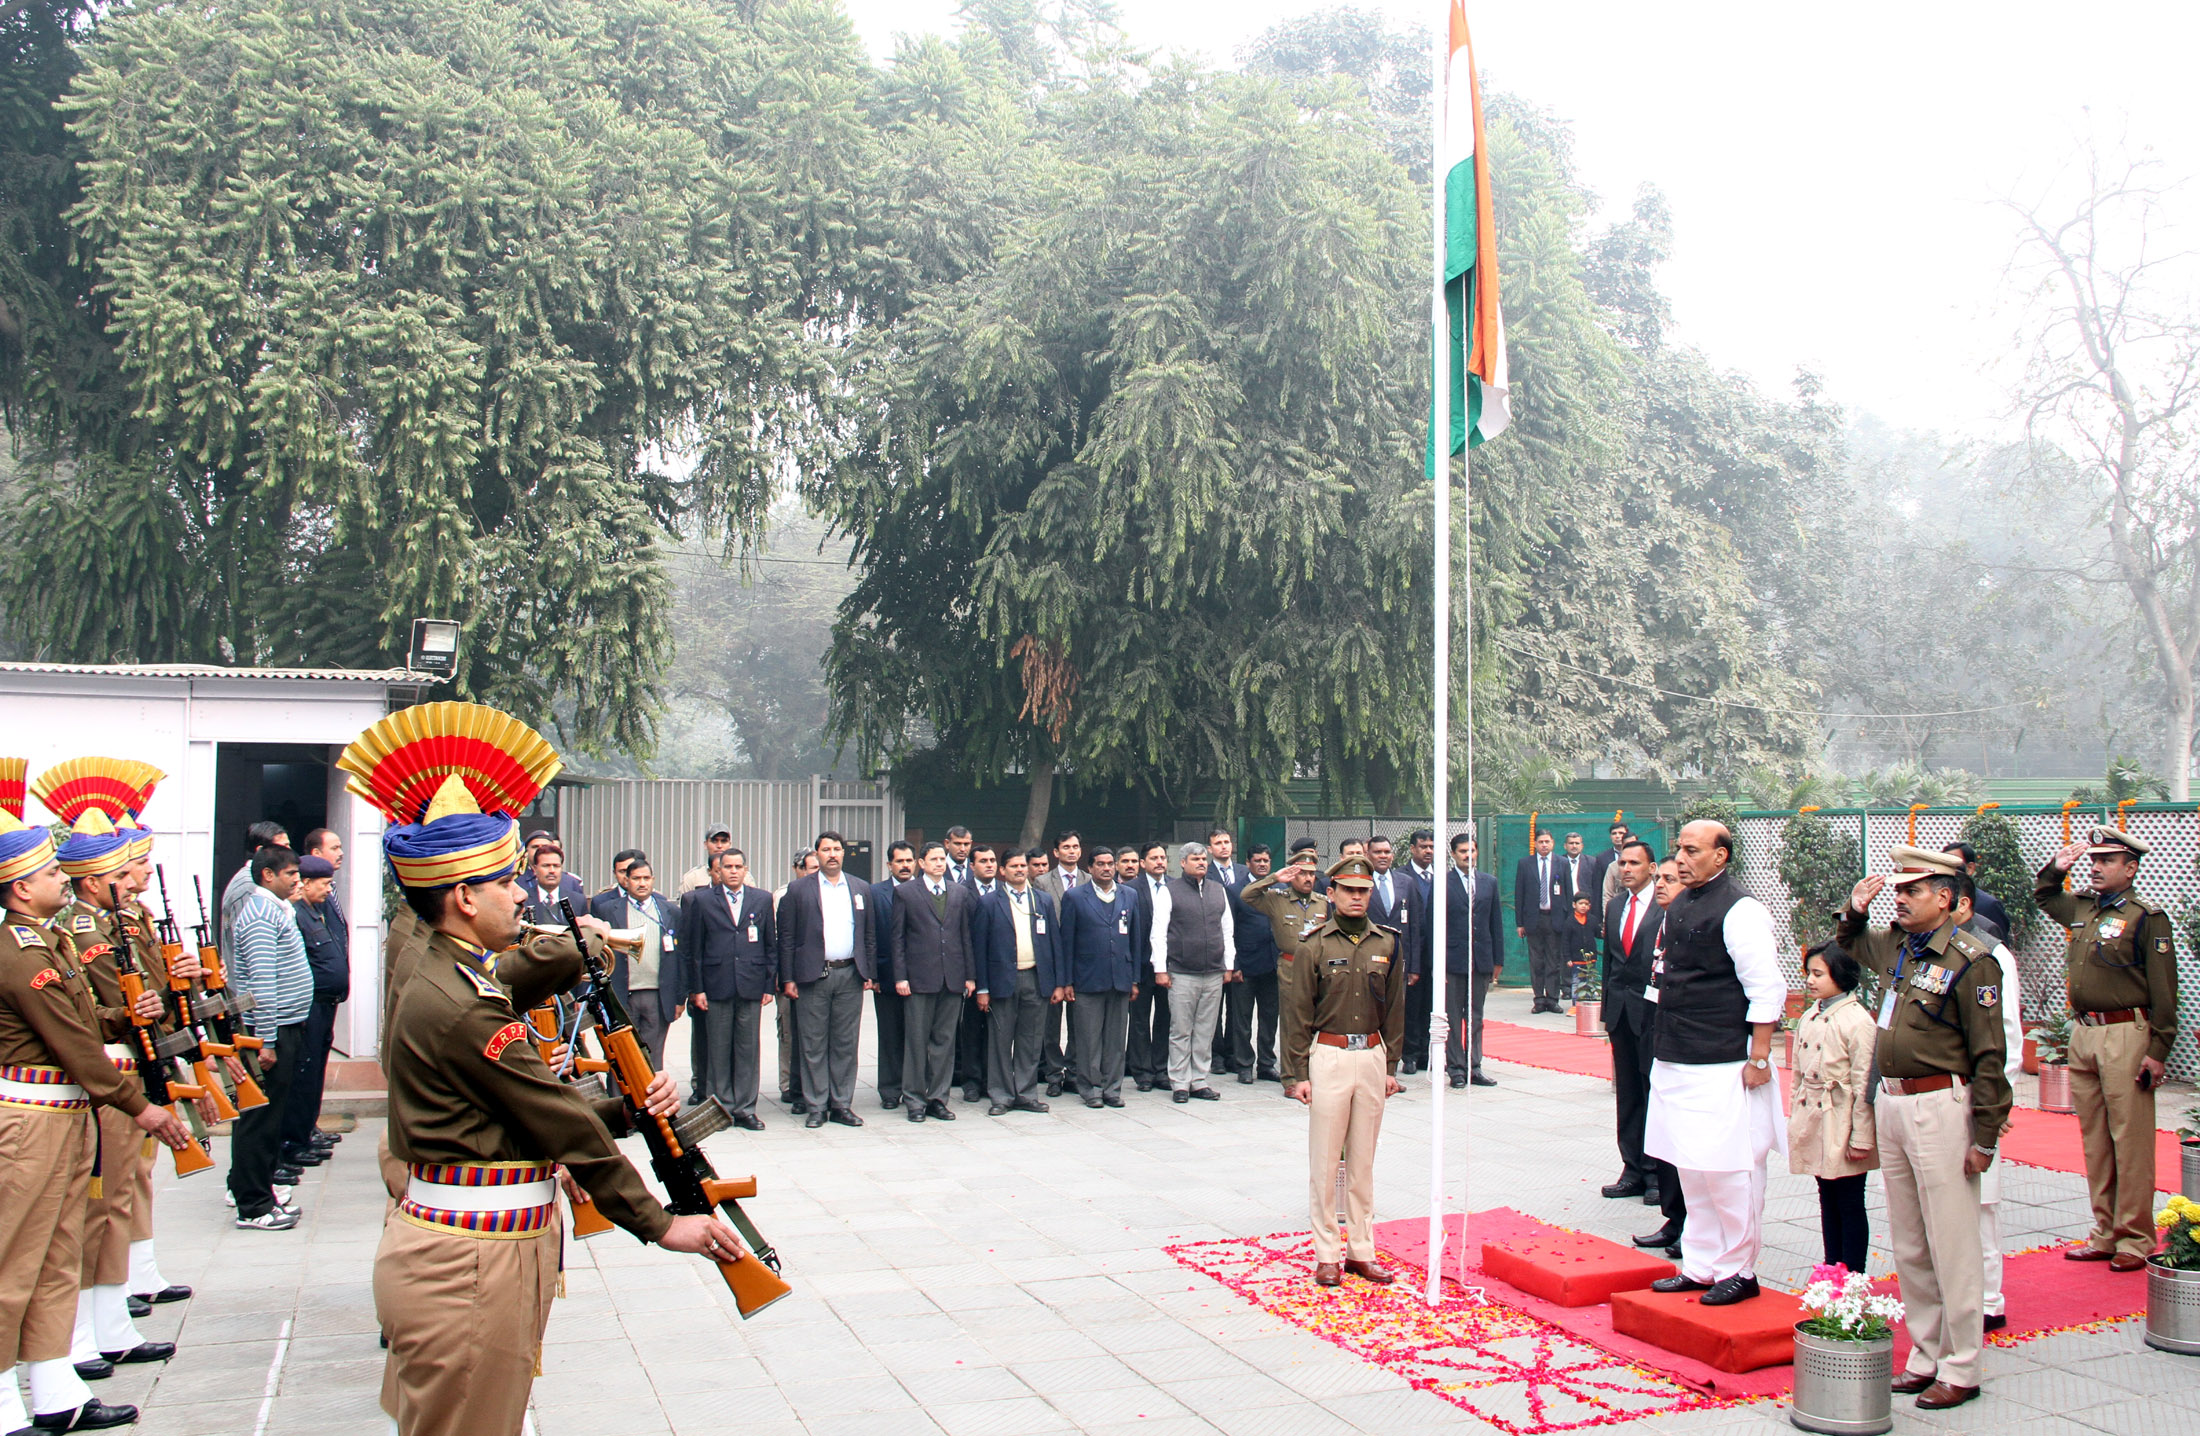 The Union Home Minister, Shri Rajnath Singh unfurled the National Flag on the occasion of the 67th Republic Day, in New Delhi on January 26, 2016.